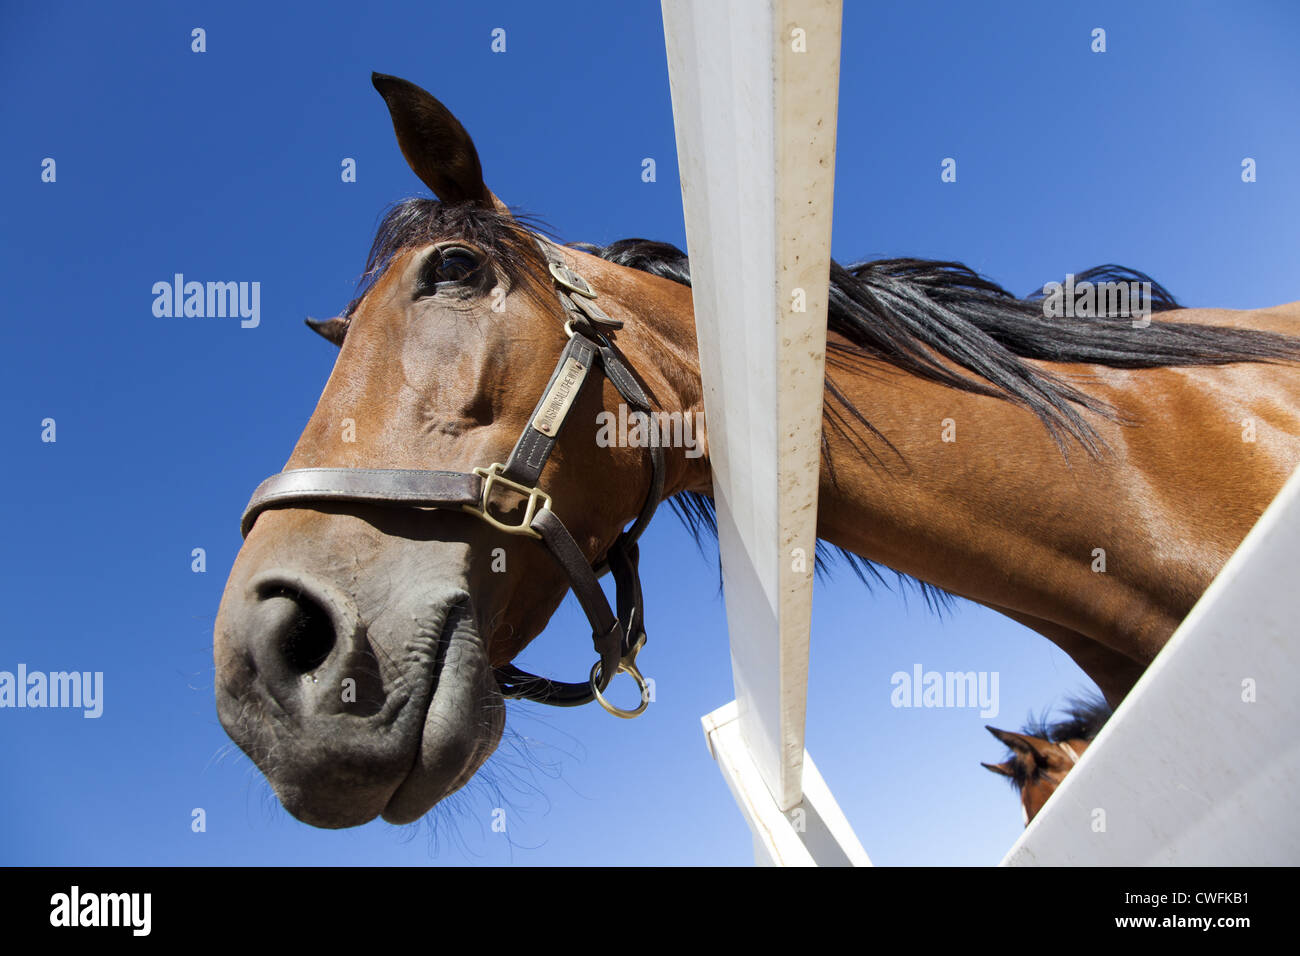 Bay horse wearing a head colllar looking over white fence, shot from below Stock Photo